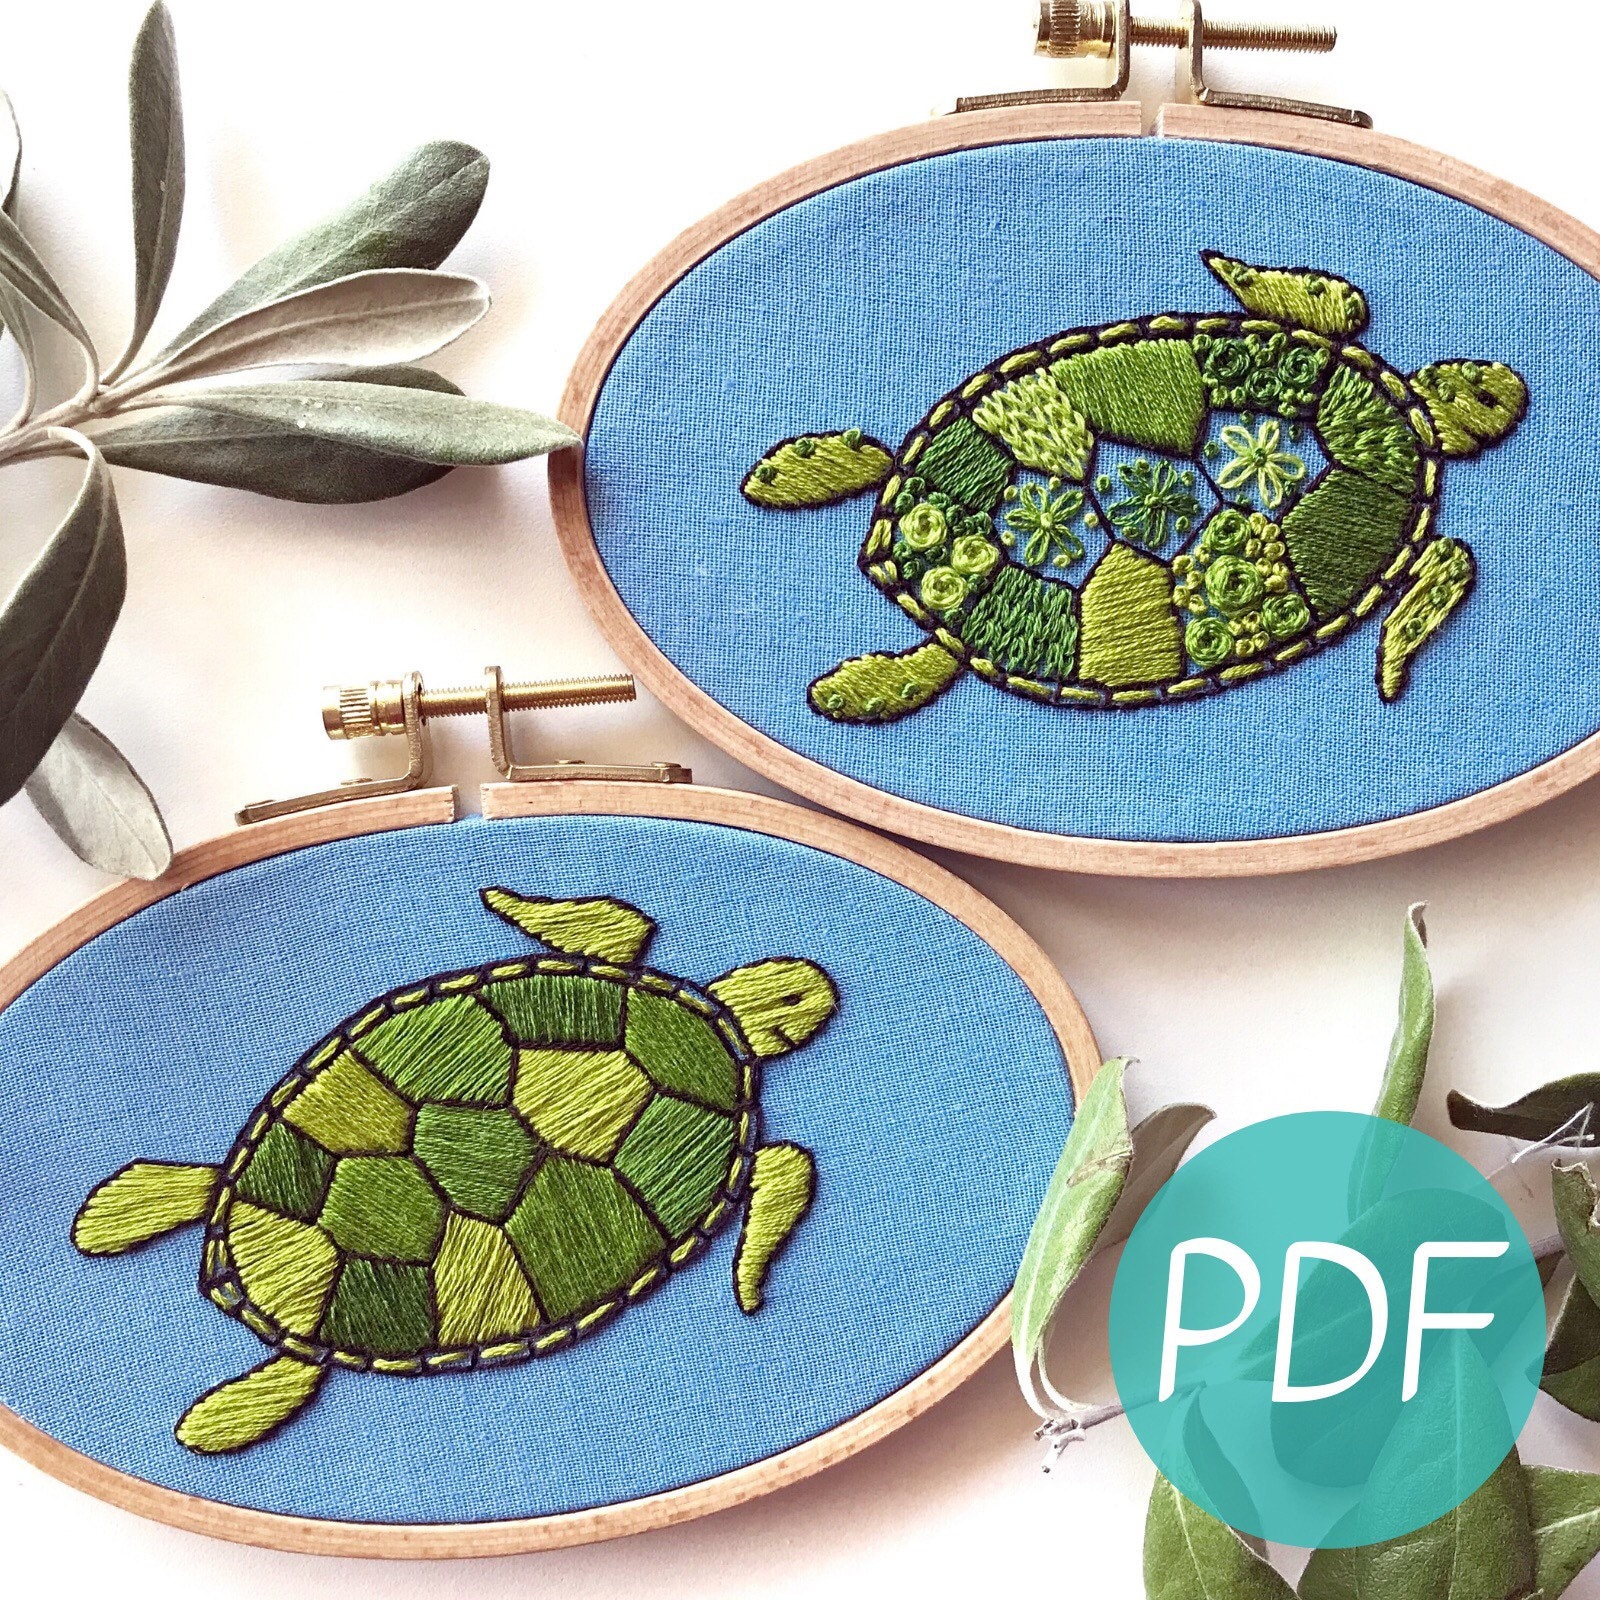 Turtle Embroidery Patterns - DIY Embroidery Kit - Kid's Cute